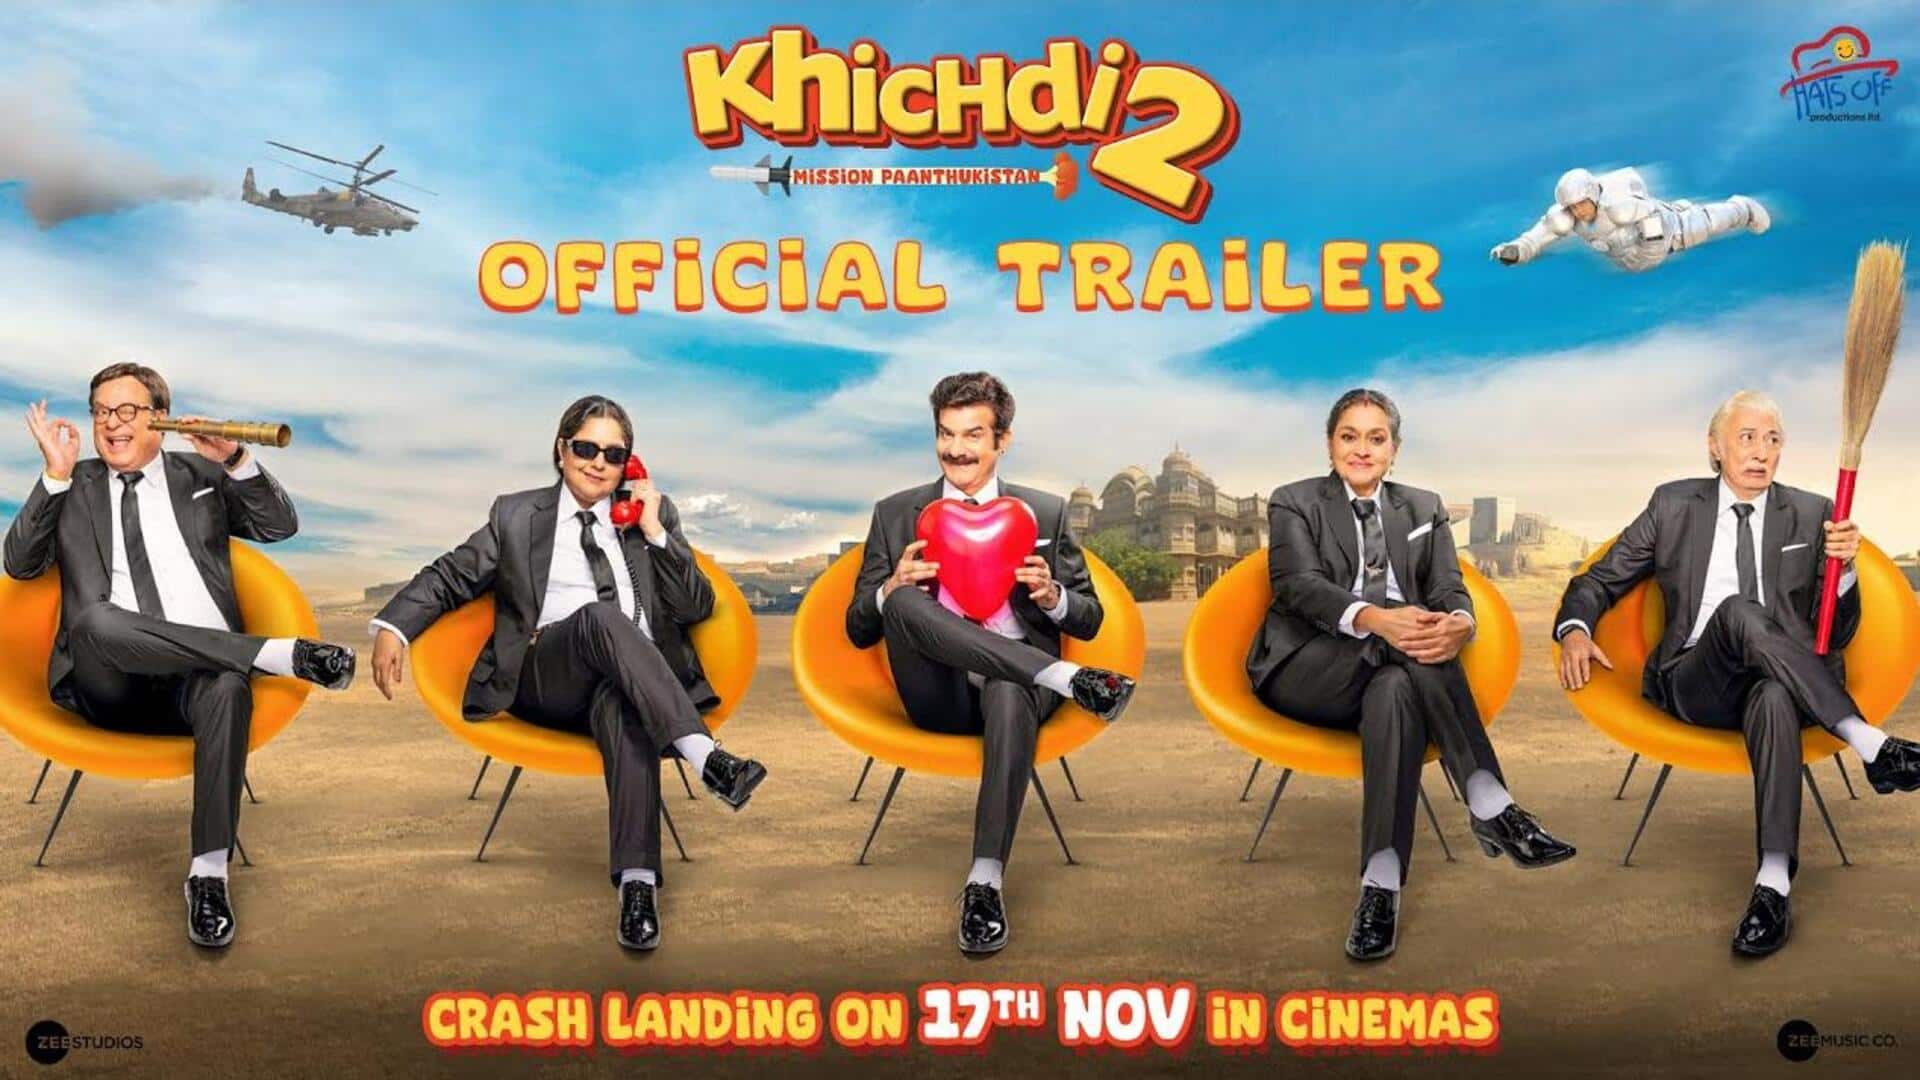 Box office collection: 'Khichdi 2' is a hotchpotch financially